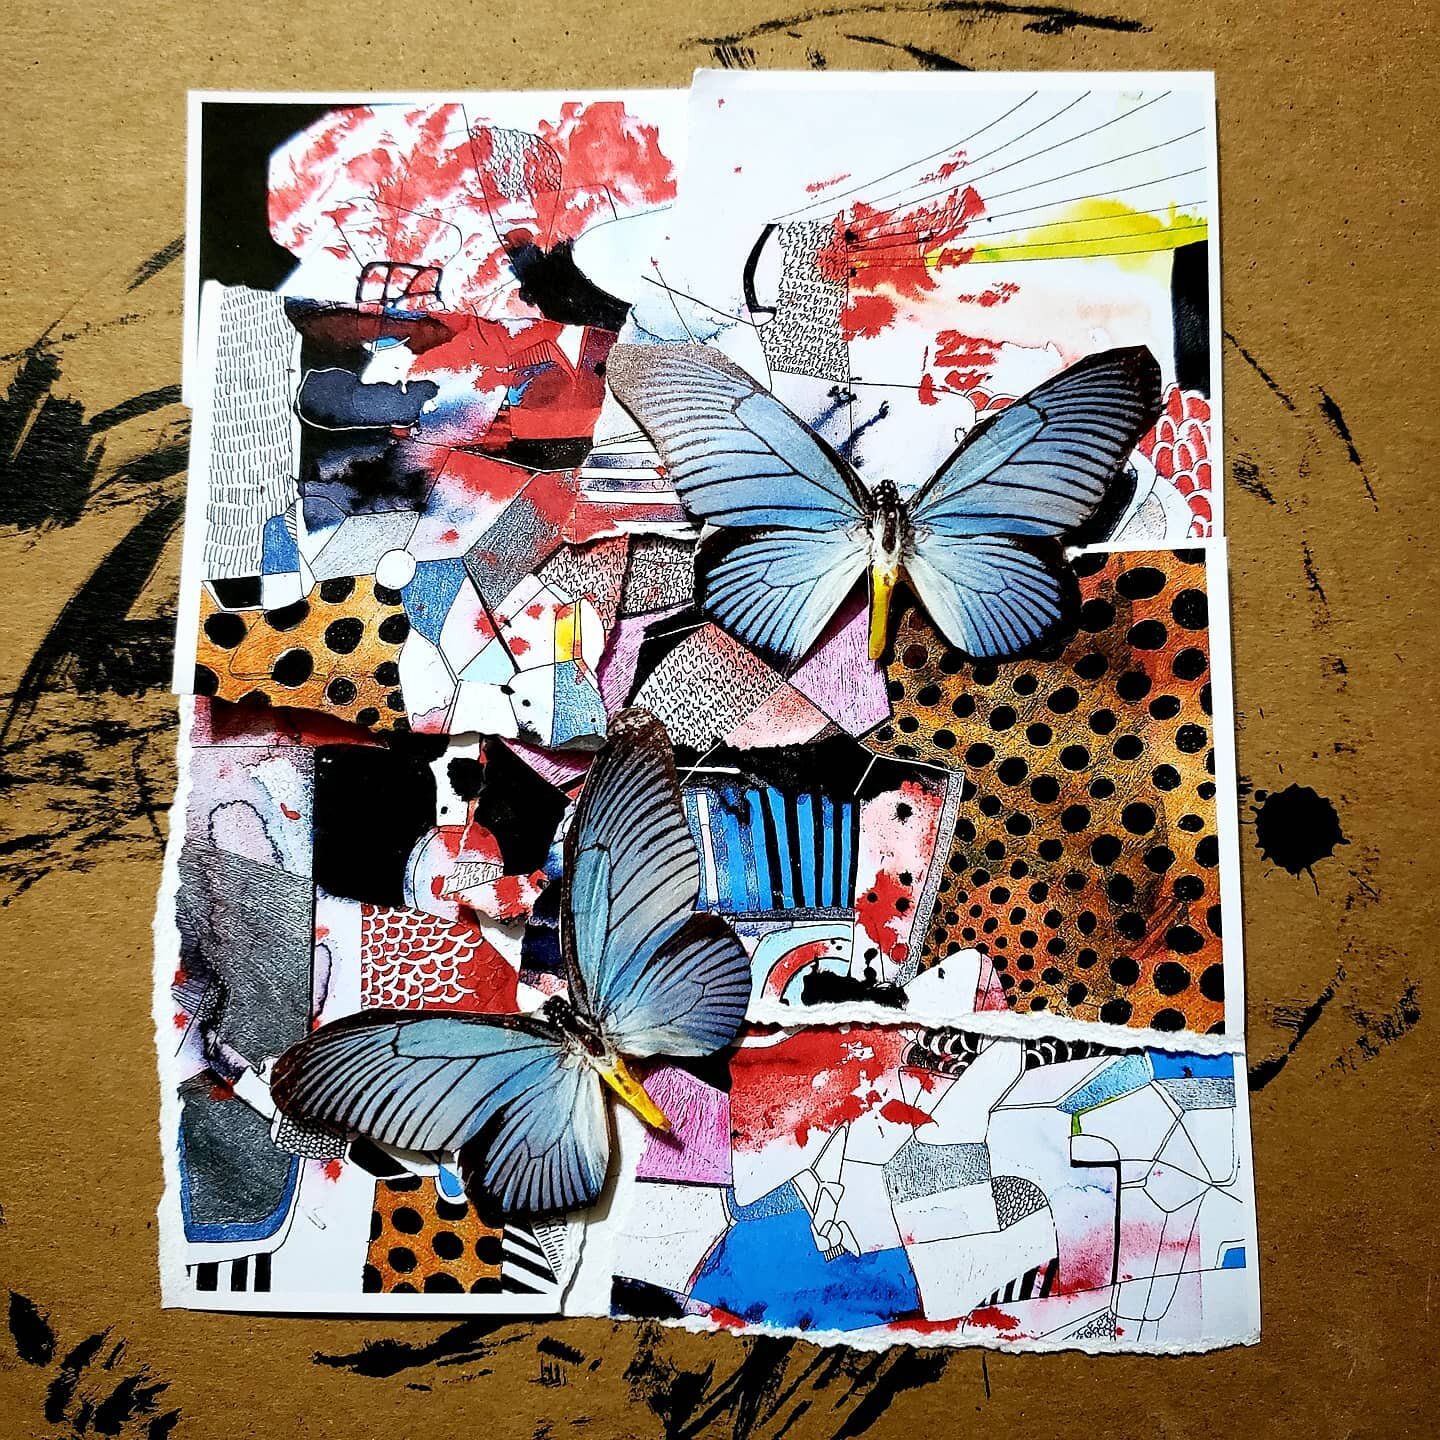 My sister sent me a box of stuff with our Grandma's perfume and collage material! Collage is something I do to take breaks from drawing. A gift for her, thank you @kelly_don
I'll send it once the glue  dries
 

 #DannyAugustine #ArtistonInstagram&nbs